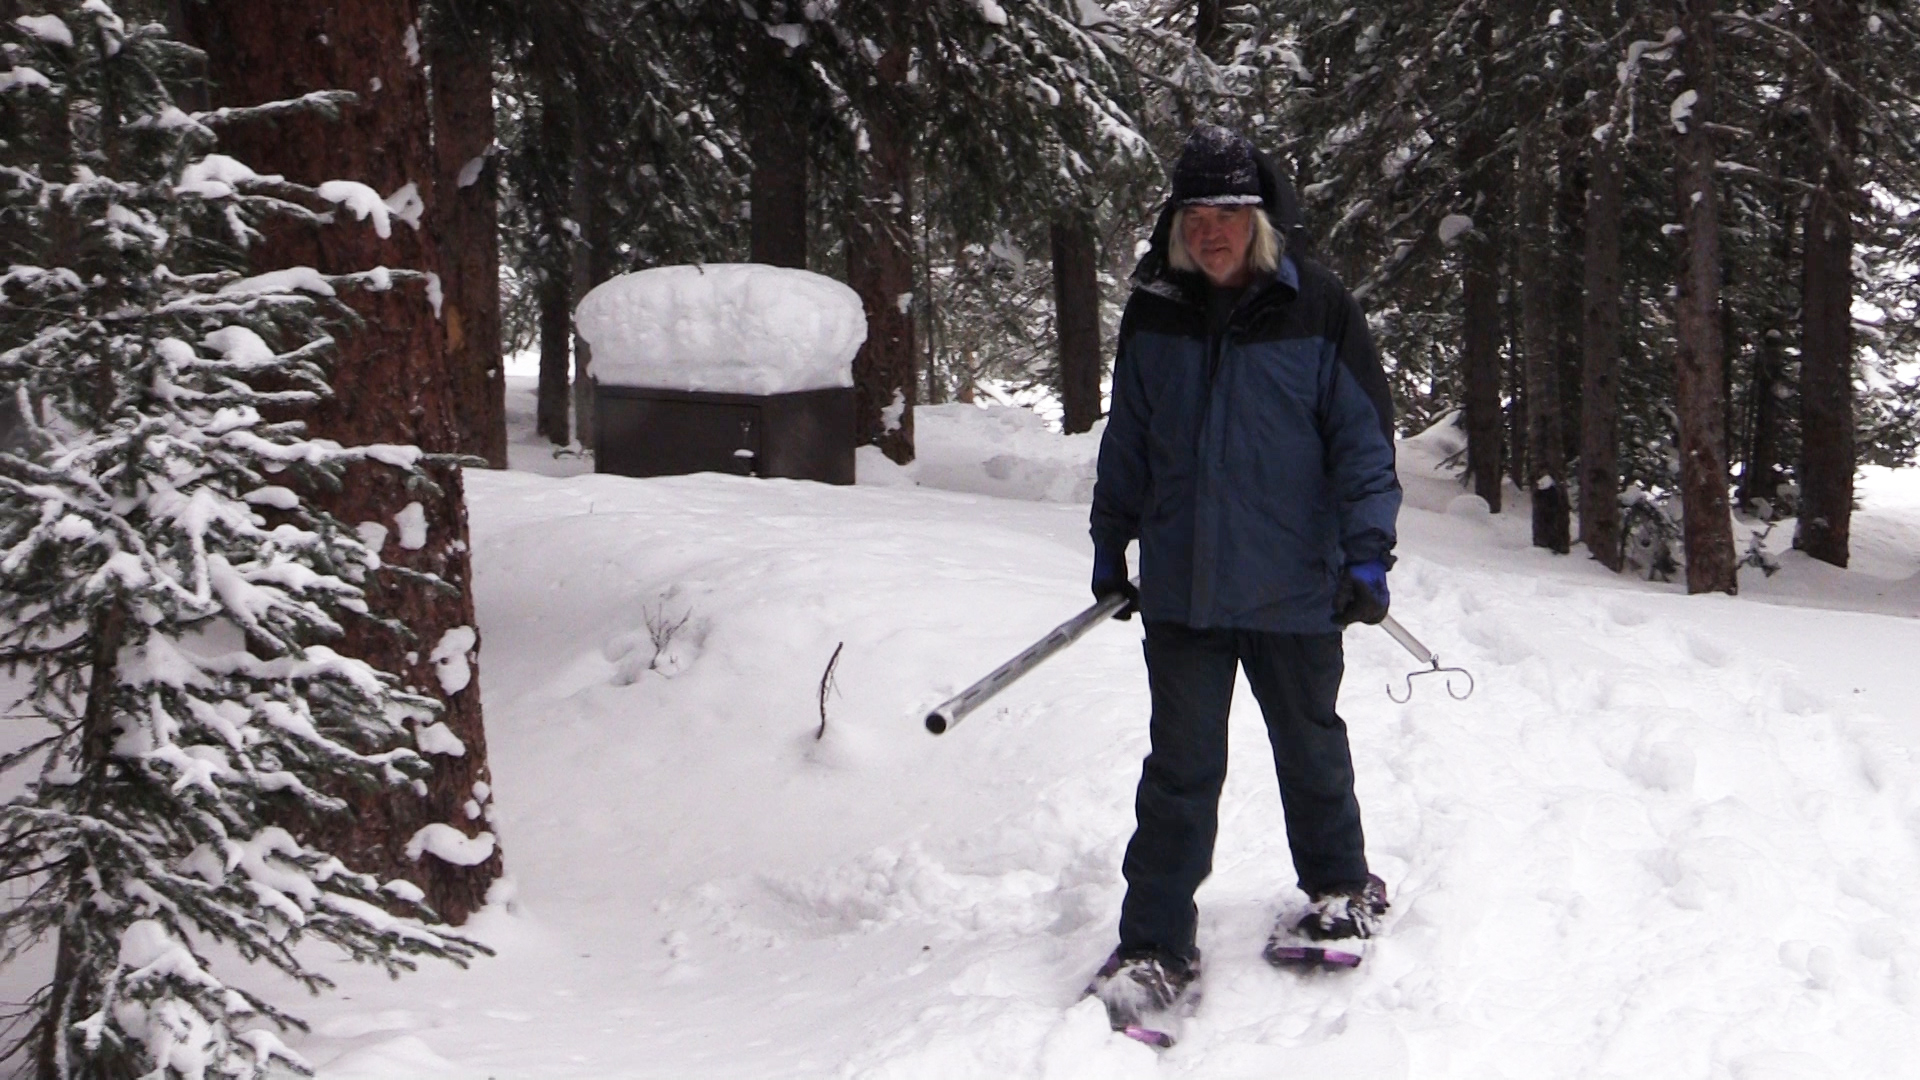 Per Olsson snowshoes through the woods to access snow-measuring sites.